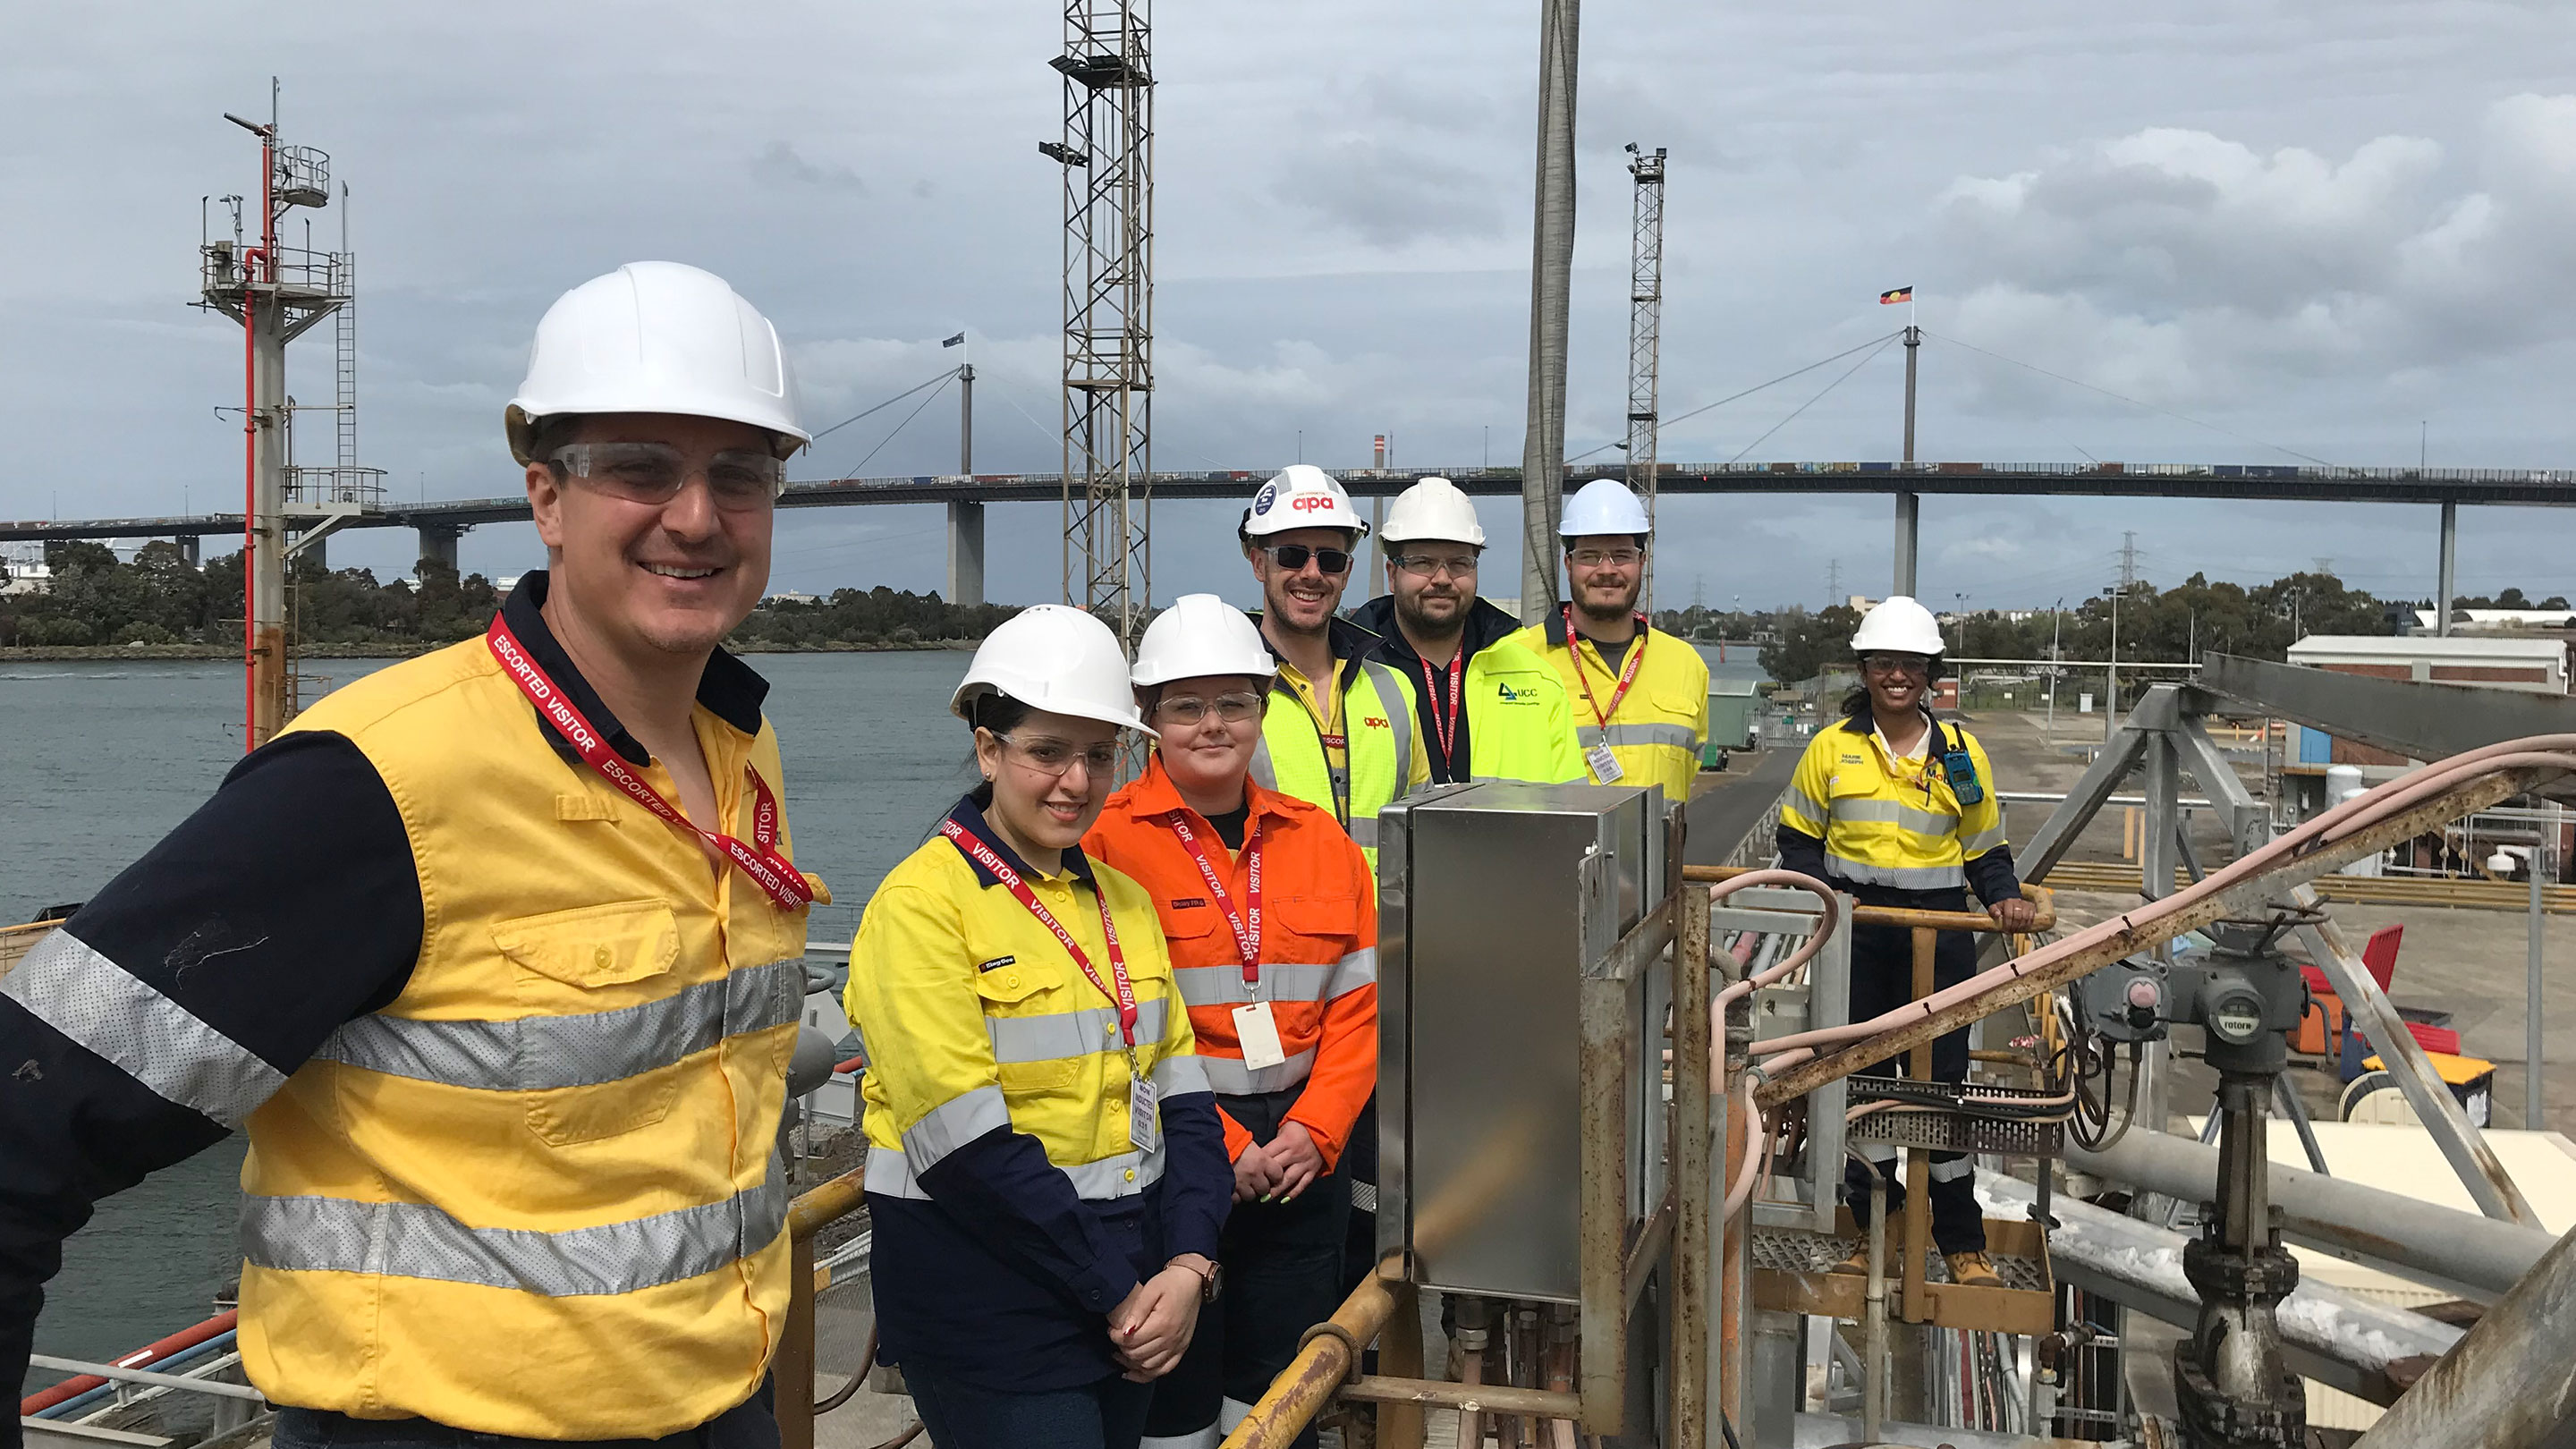 Yarraville Terminal hosts site visit for Young Pipeliners Forum members